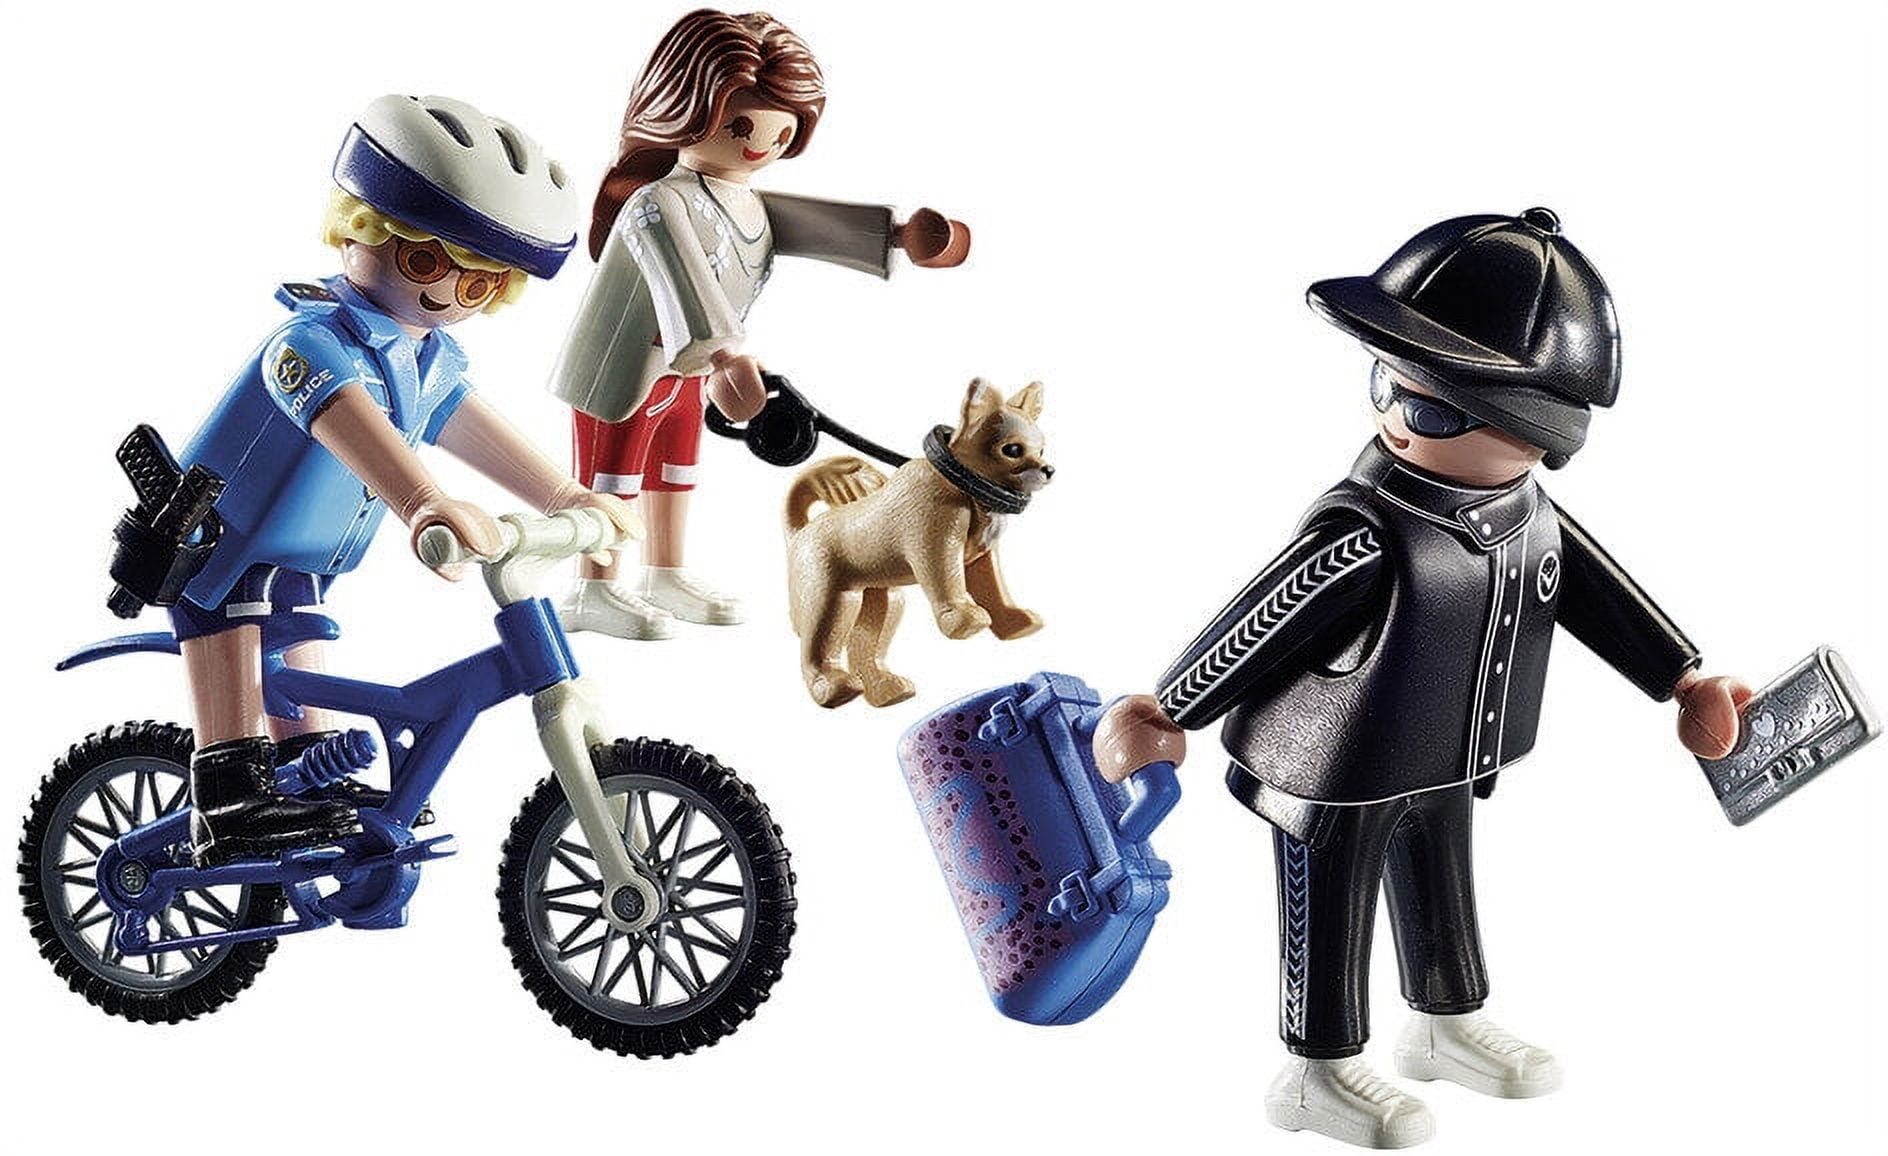 PLAYMOBIL Police Bicycle with Thief Action Figure Set, 17 Pieces